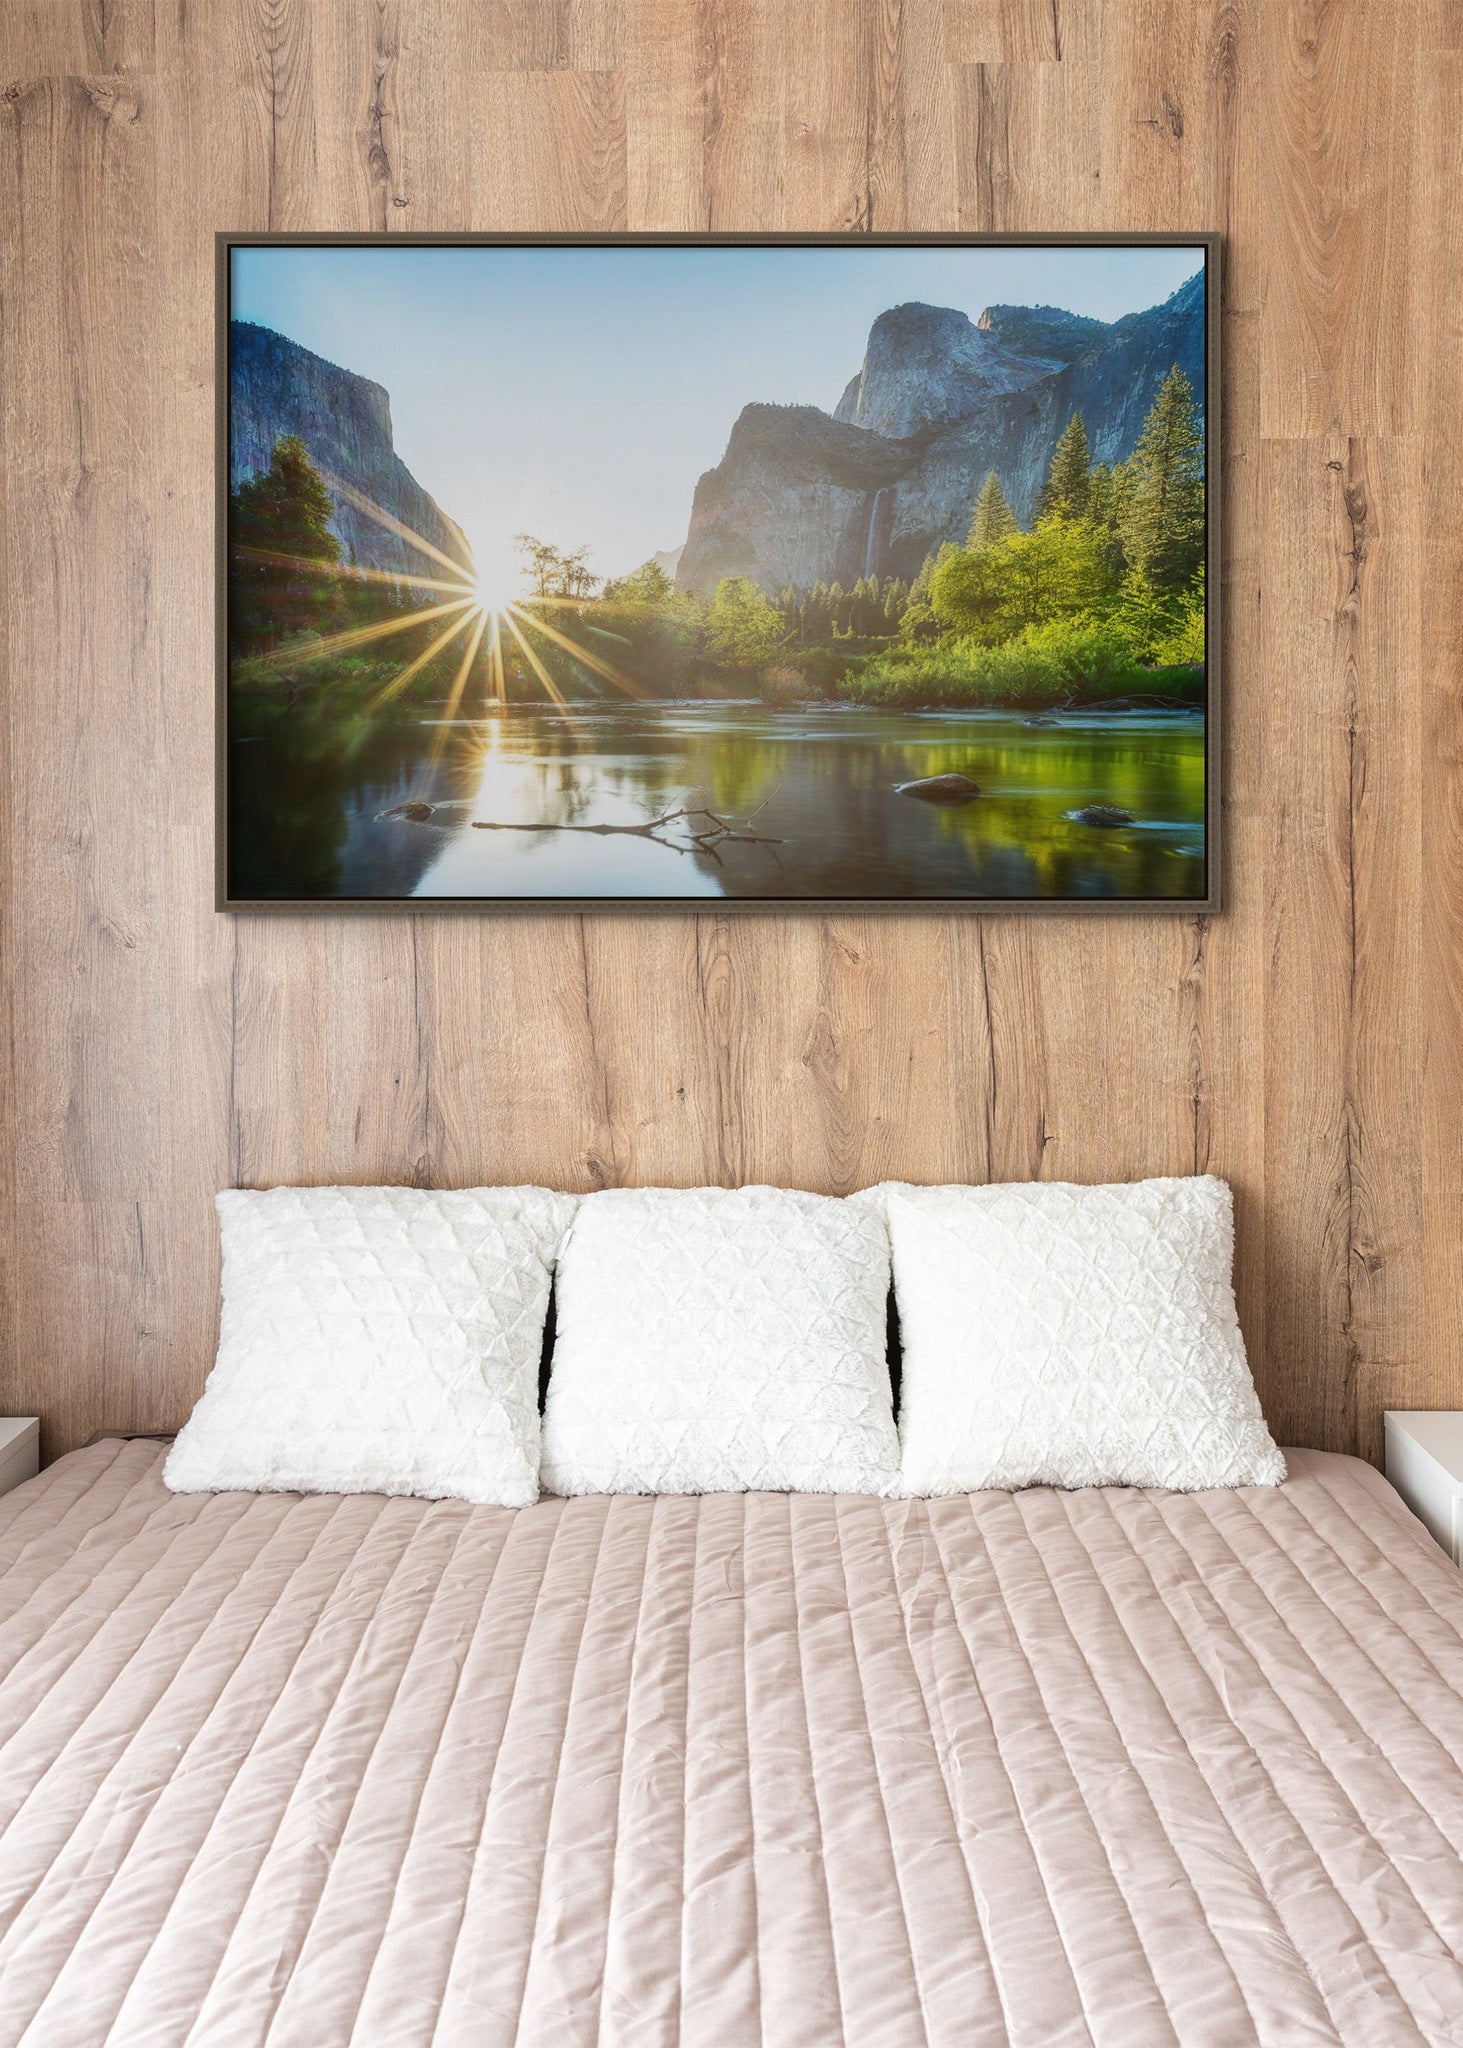 Picture hanging on the wall of a hotel room bed. The picture is a fine art landscape photograph titled "Summer Valley View" by Cameron Dreaux of Dreaux Fine Art.